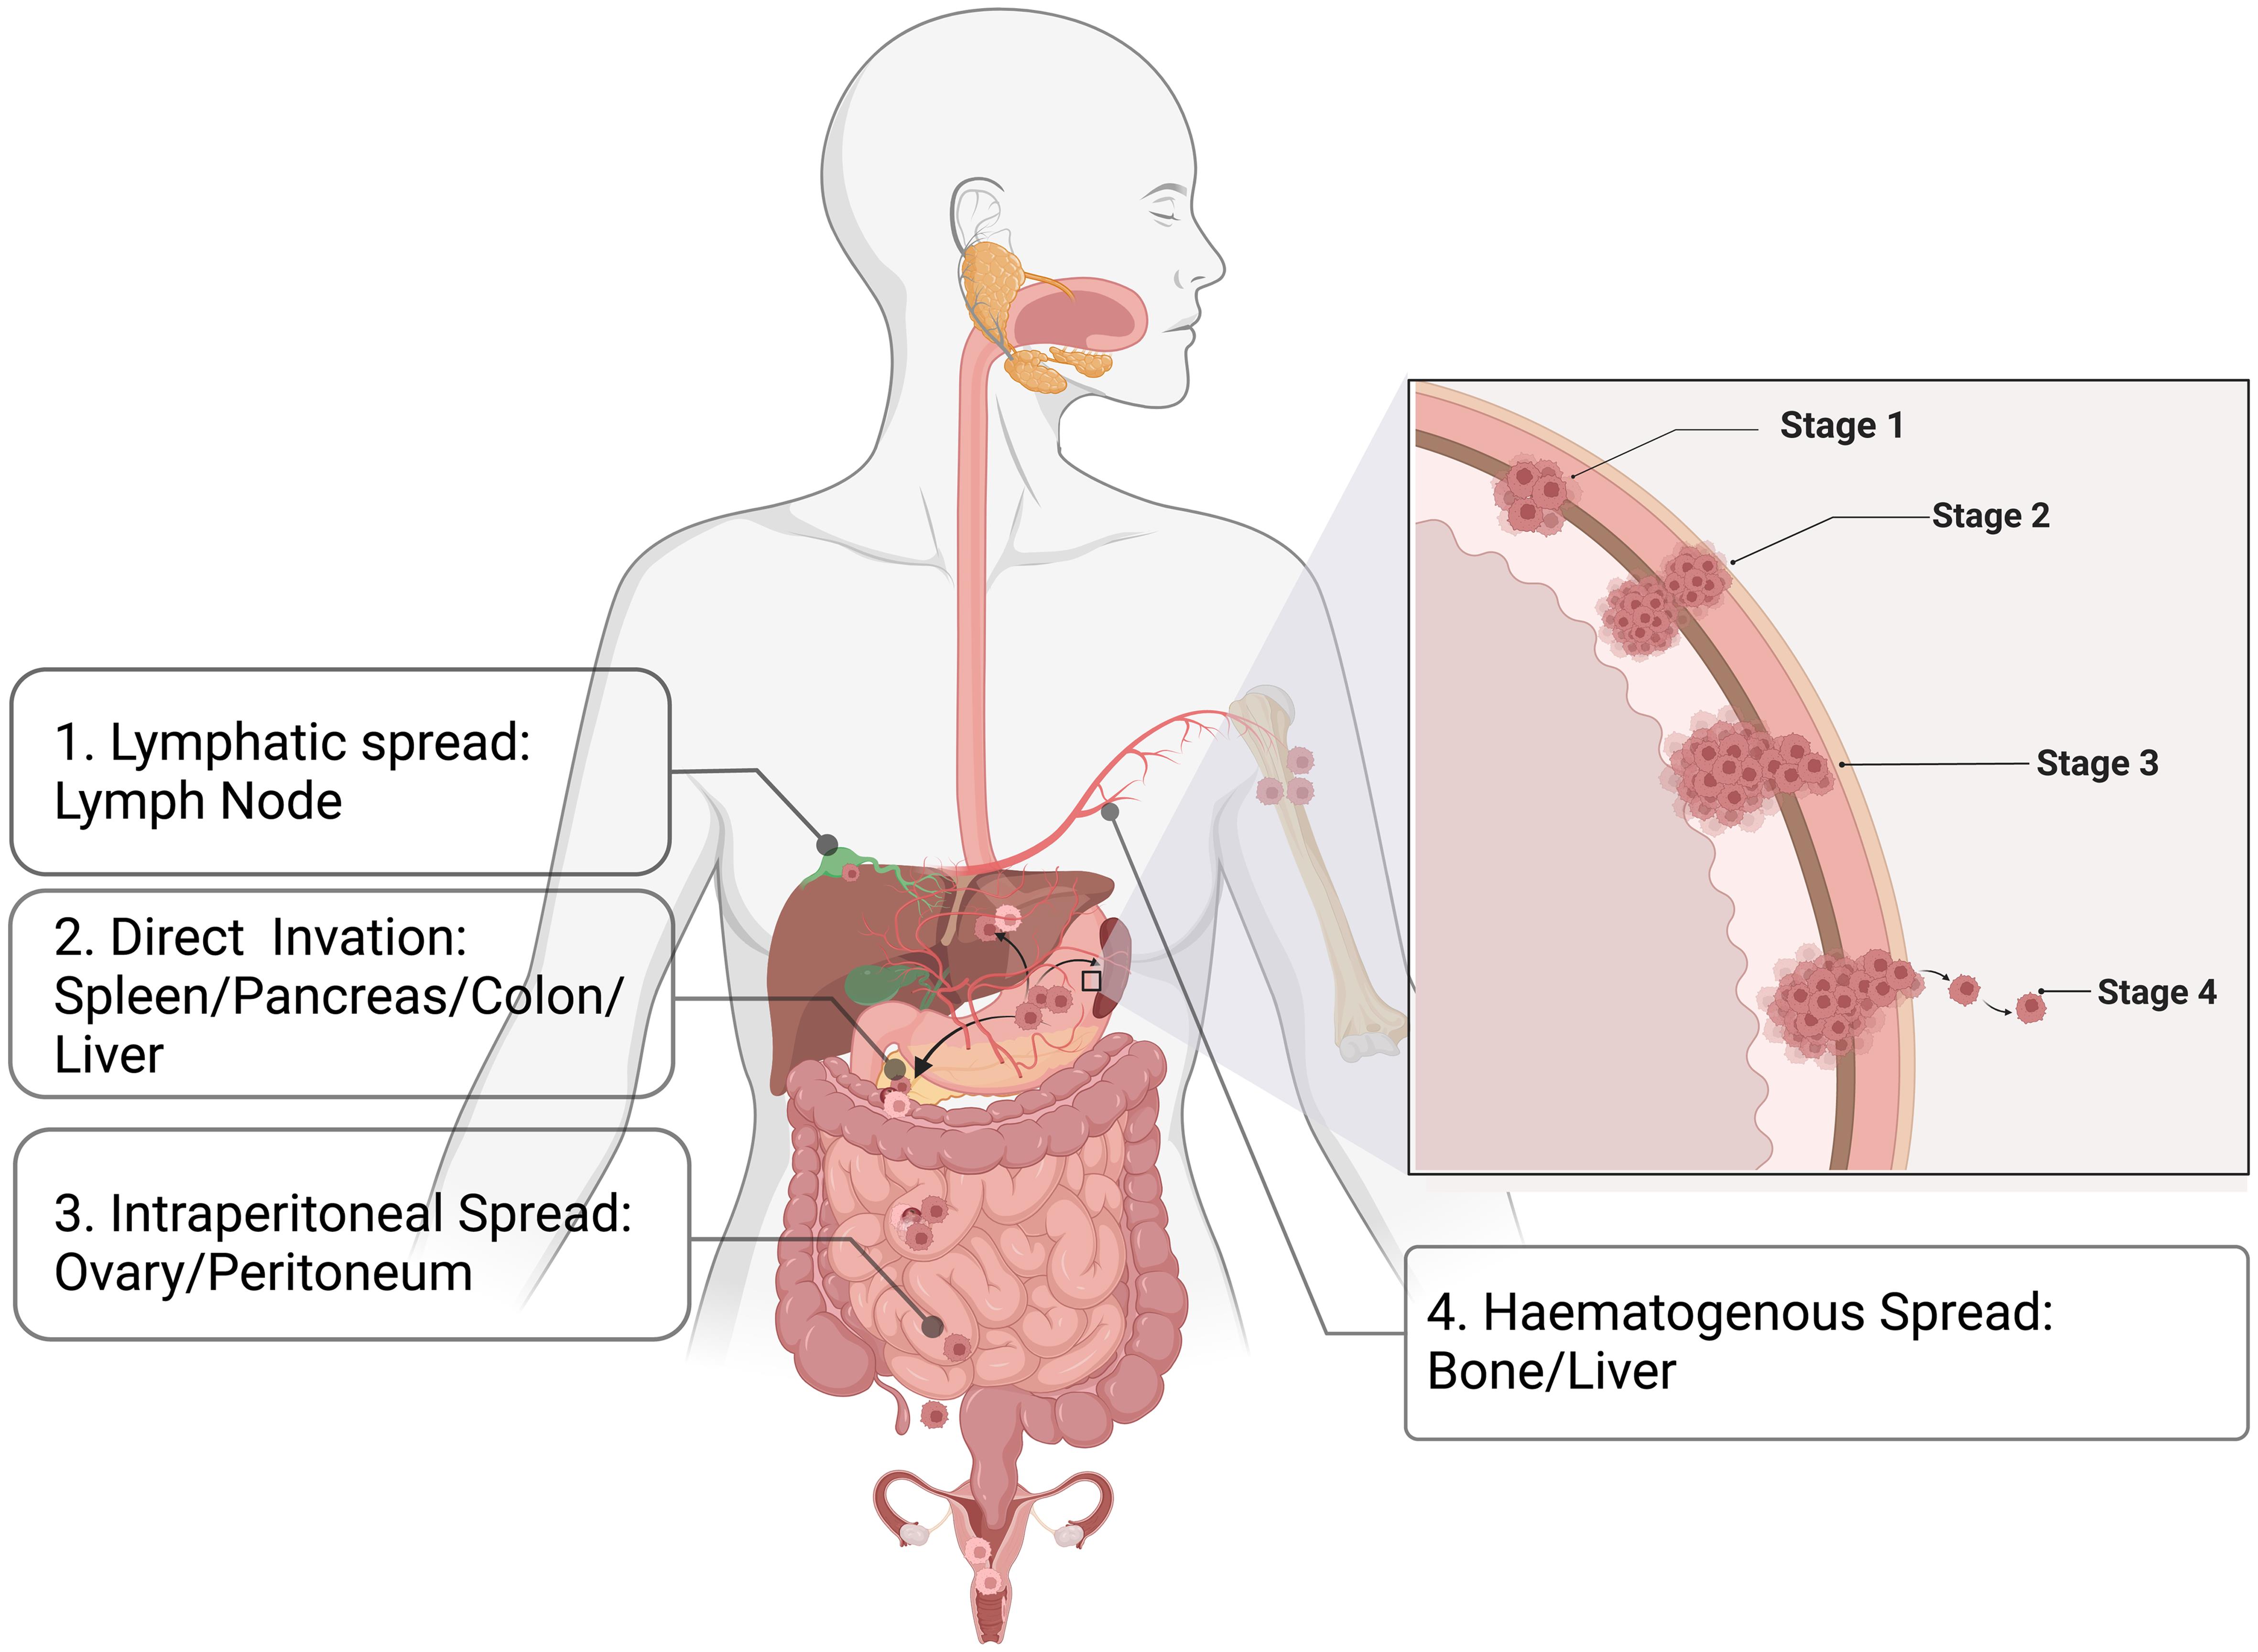 Summary of the metastatic routes and sites in gastric cancer.